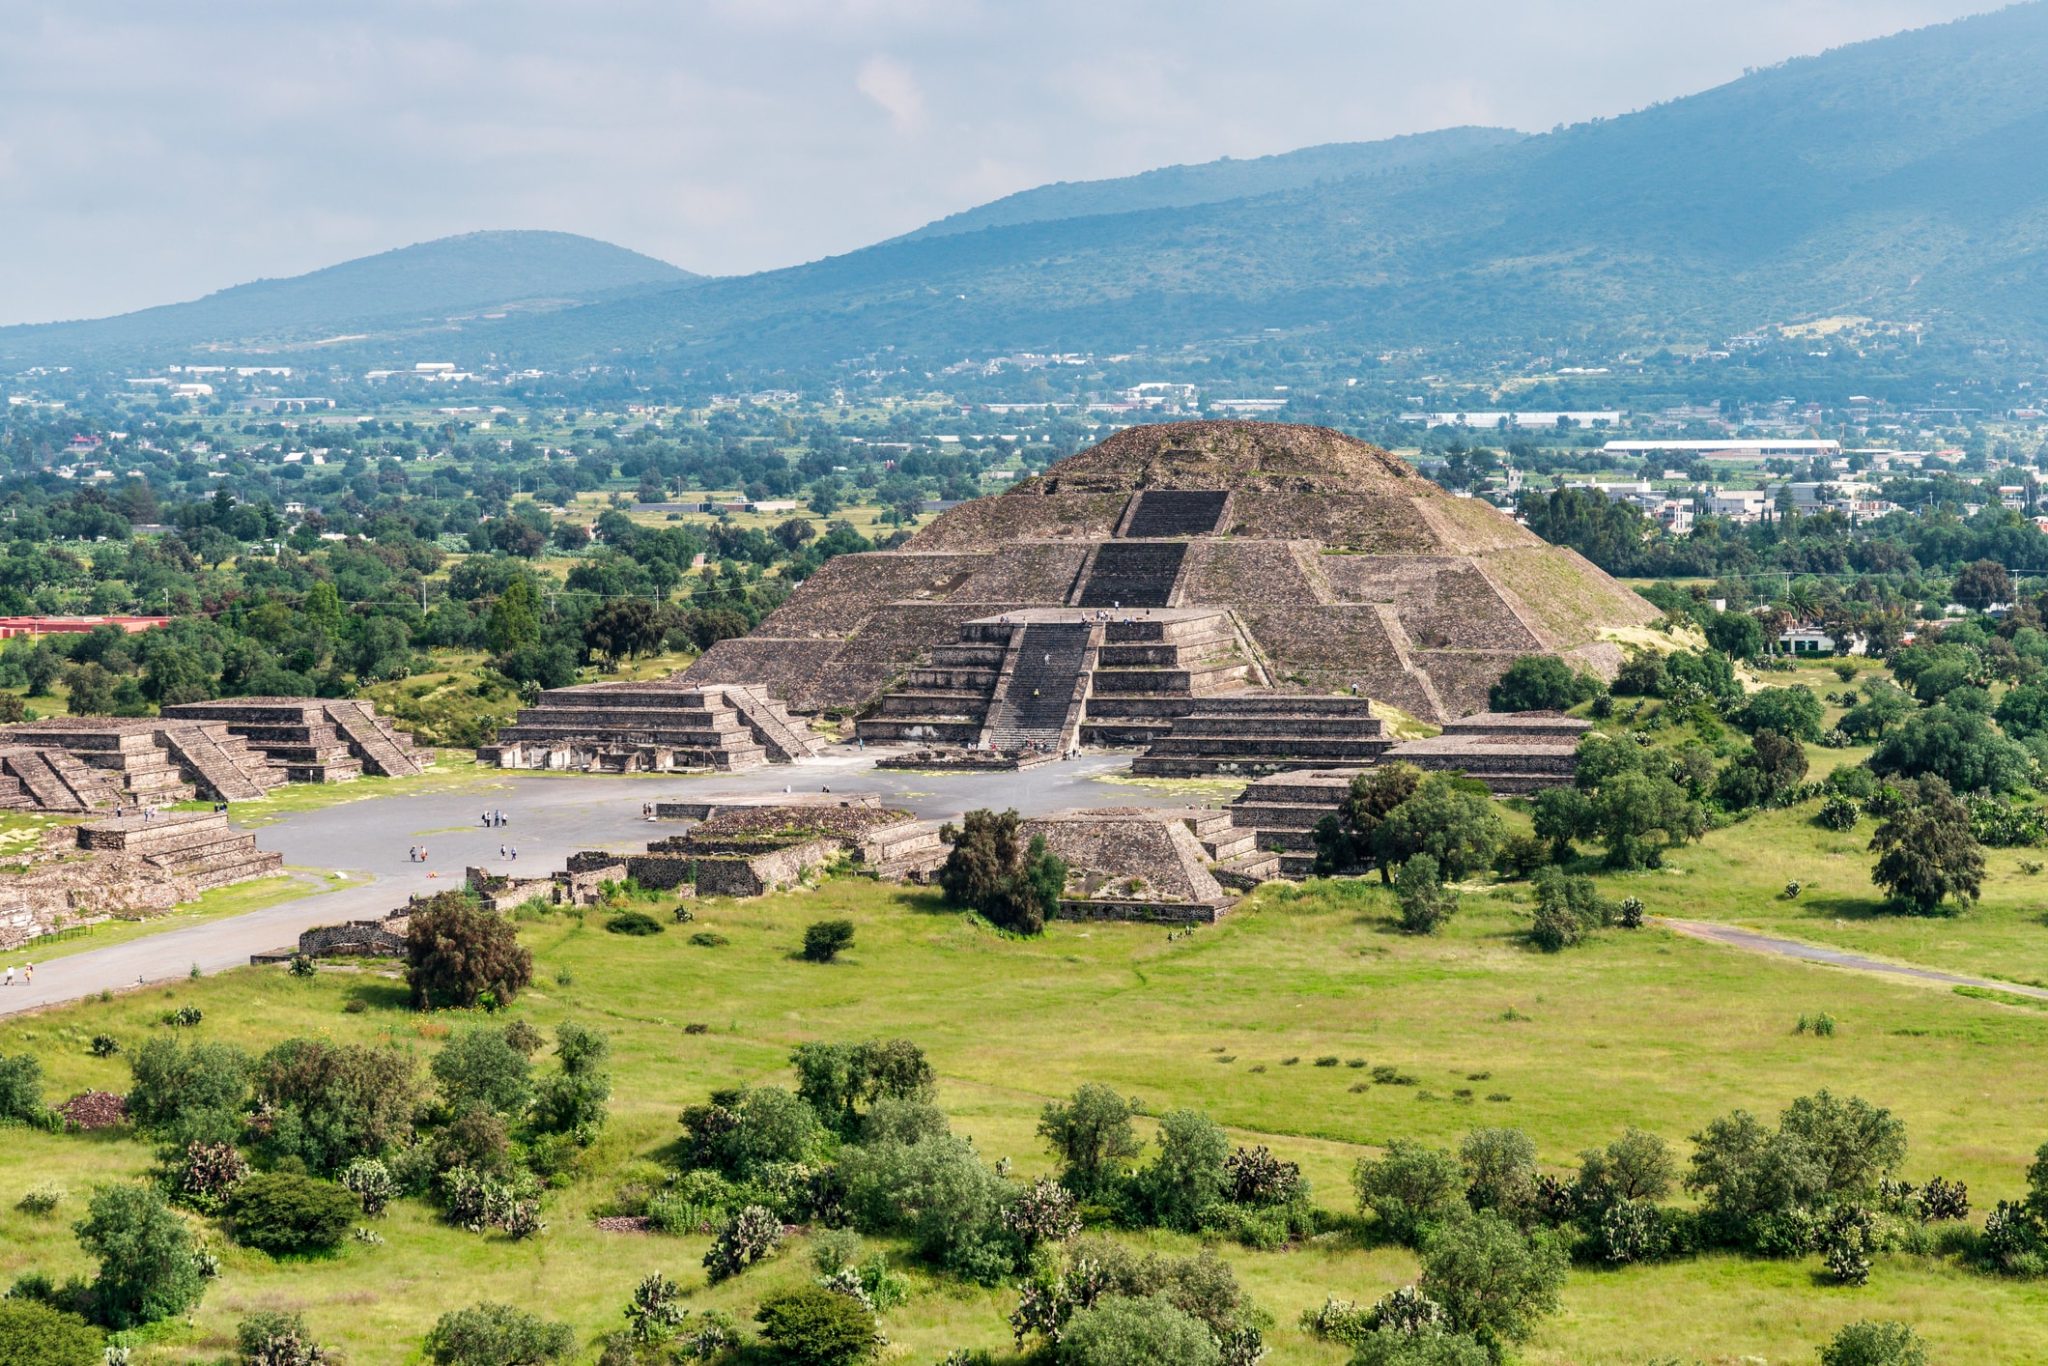 Ancient-Teotihuacan-pyramids-and-ruins-in-Mexico-City-1048432478_2123x1416